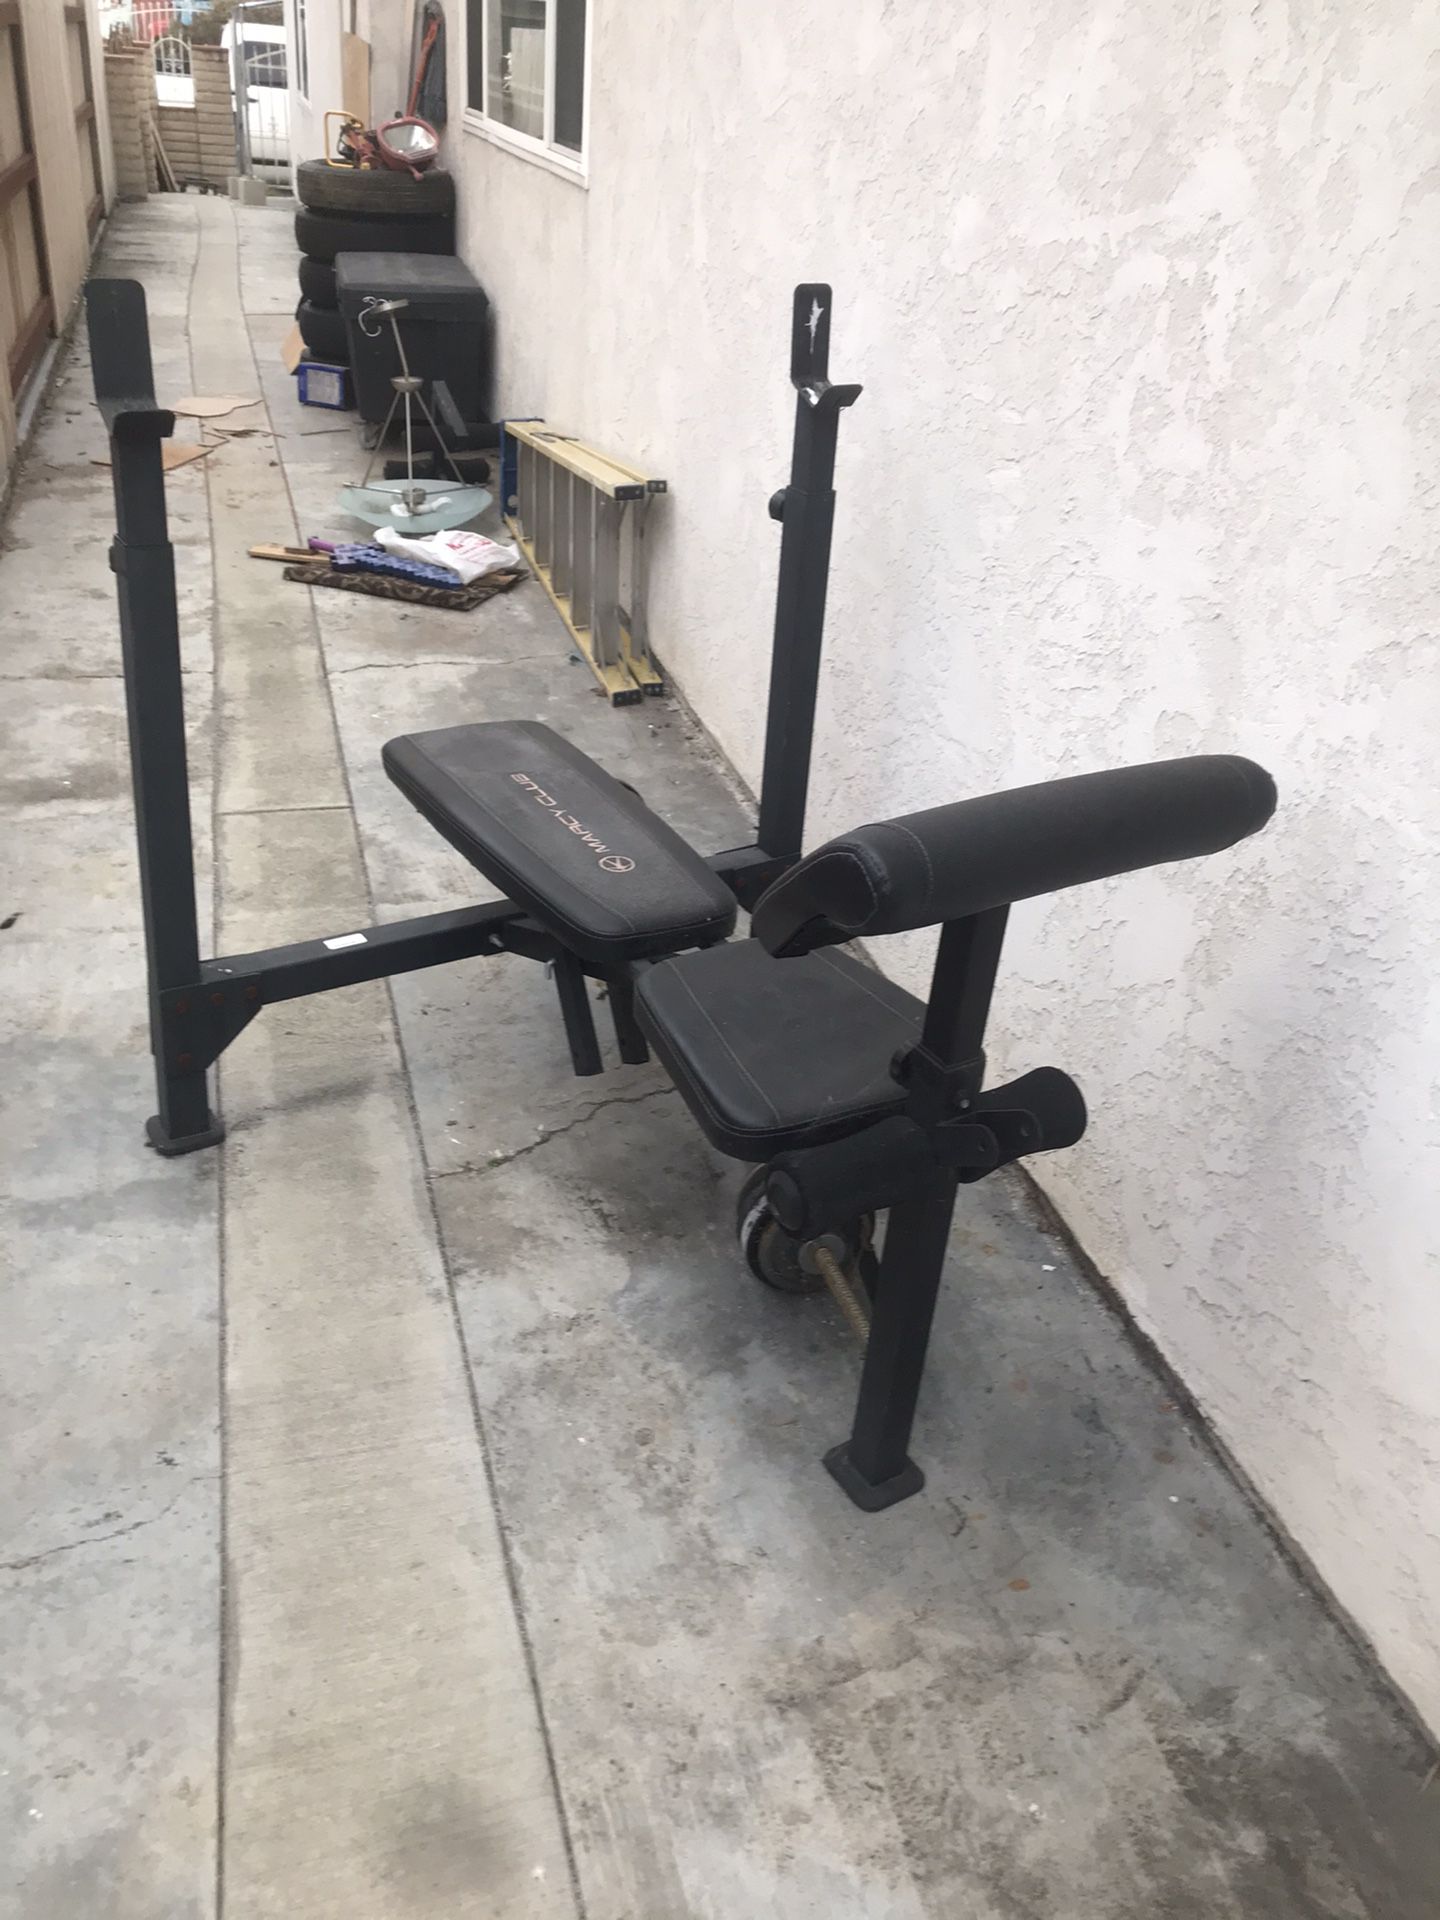 Bench press / weights and bench bar